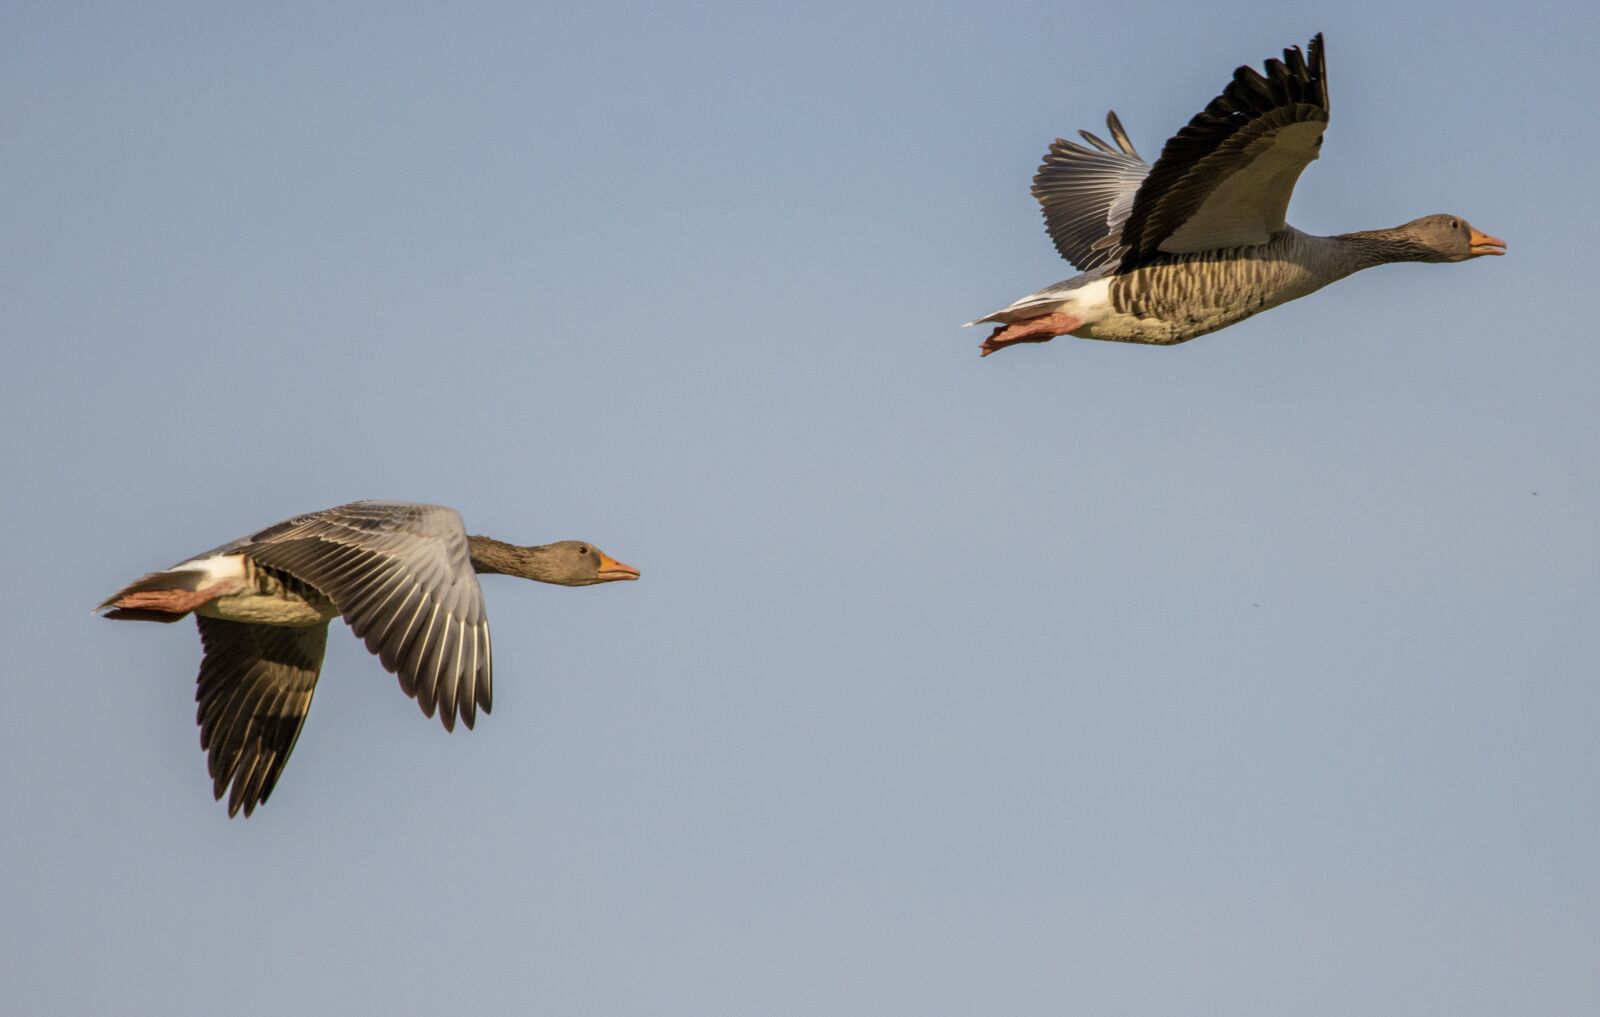 150-600mm F5-6.3 DG OS HSM | Contemporary 015 sample photo. Geese, flight, flying geese photography